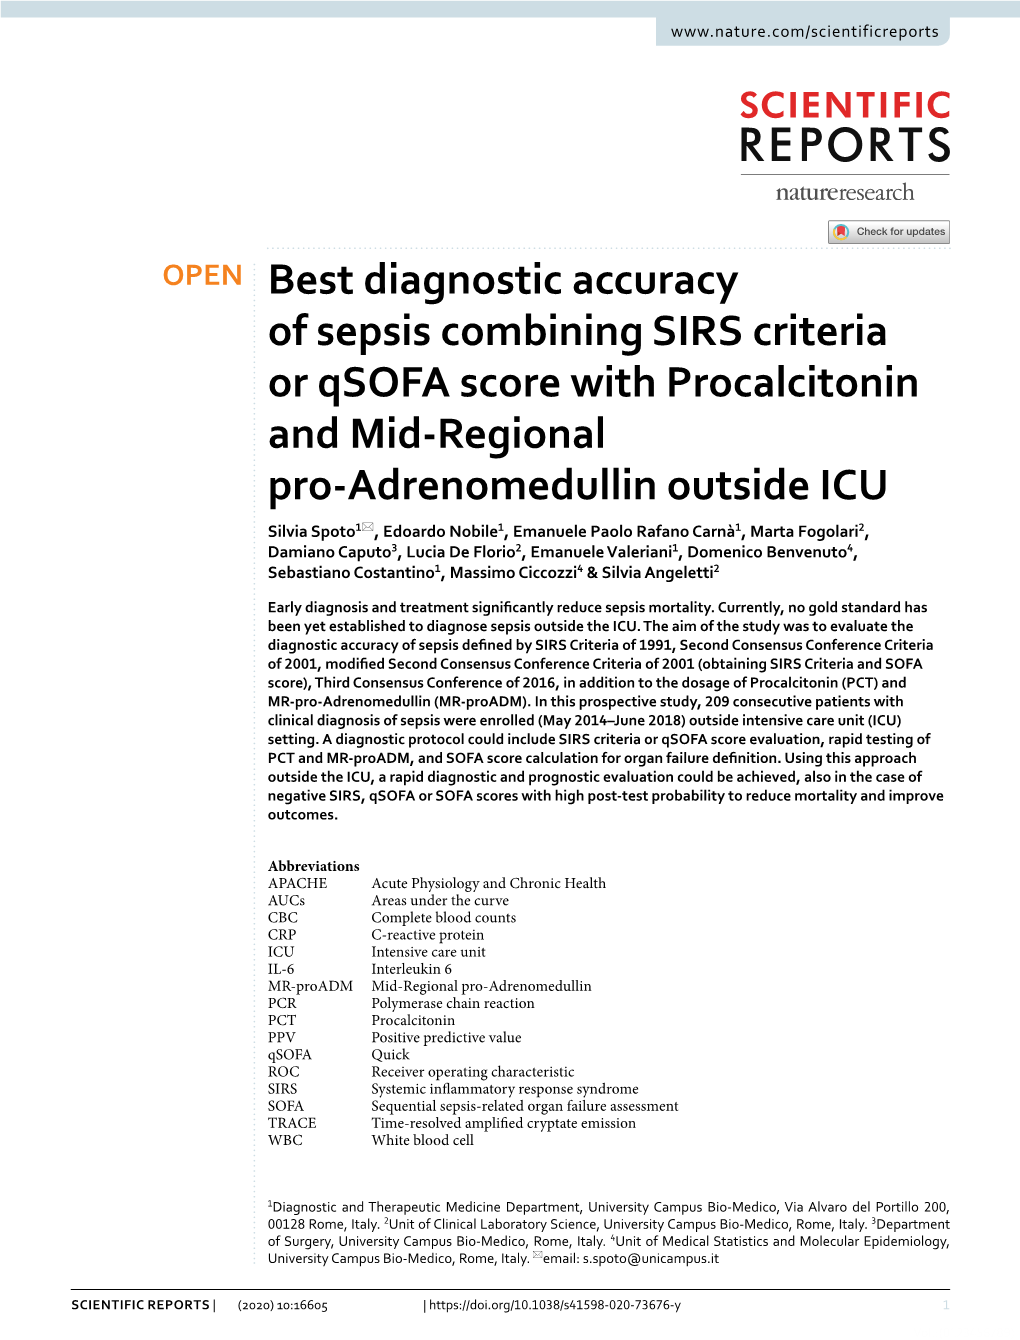 Best Diagnostic Accuracy of Sepsis Combining SIRS Criteria Or Qsofa Score with Procalcitonin and Mid-Regional Pro-Adrenomedullin